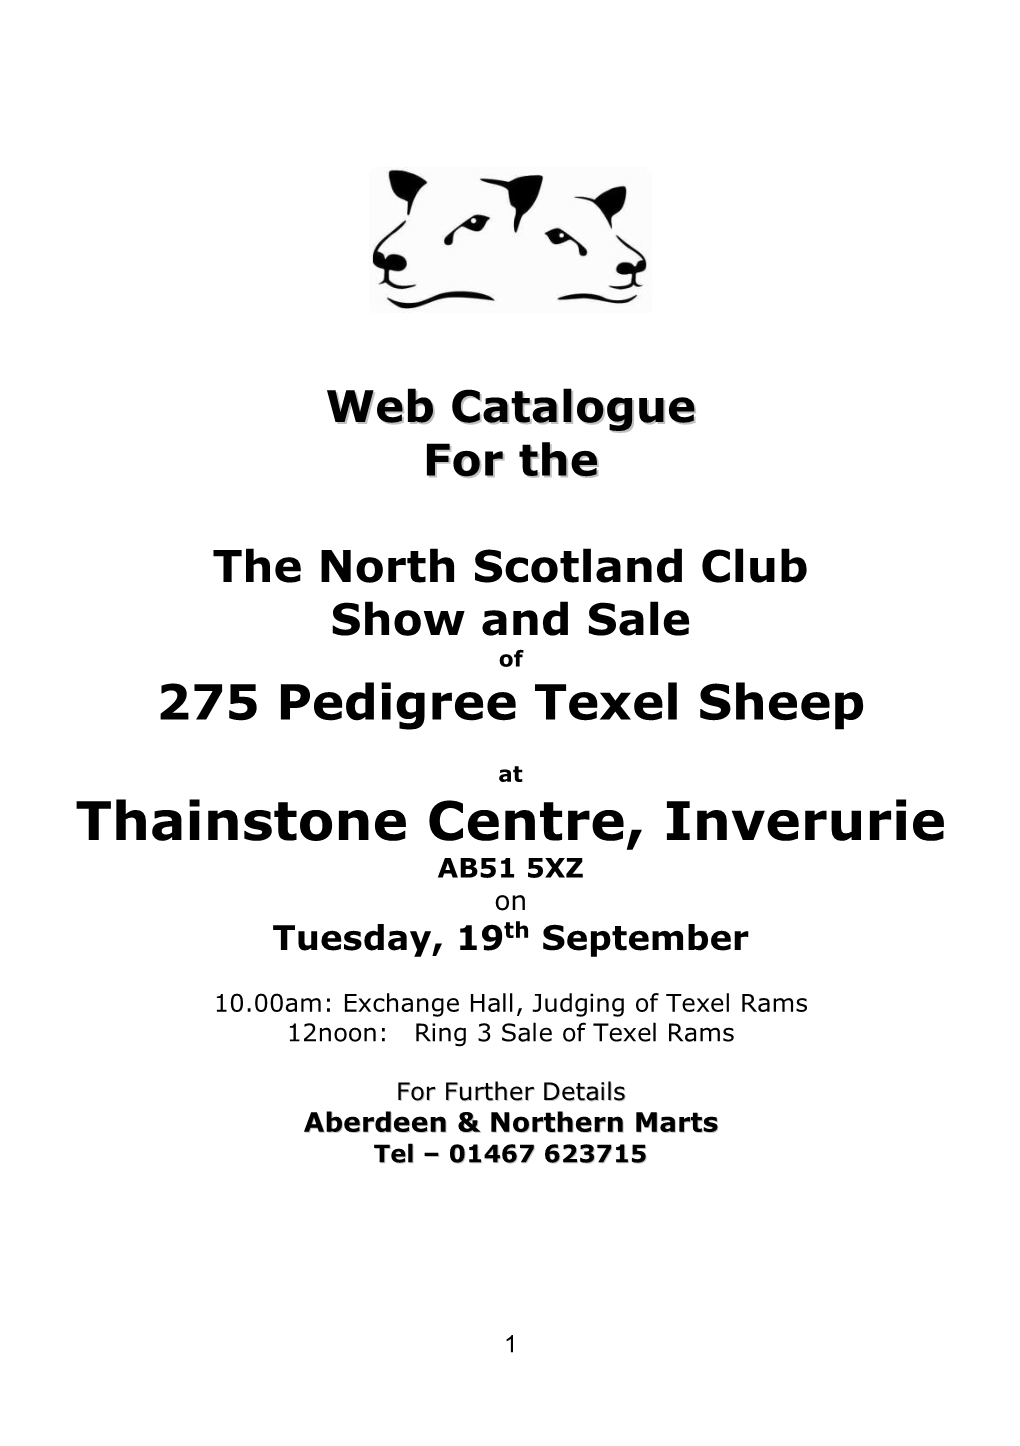 Thainstone Centre, Inverurie AB51 5XZ on Tuesday, 19Th September